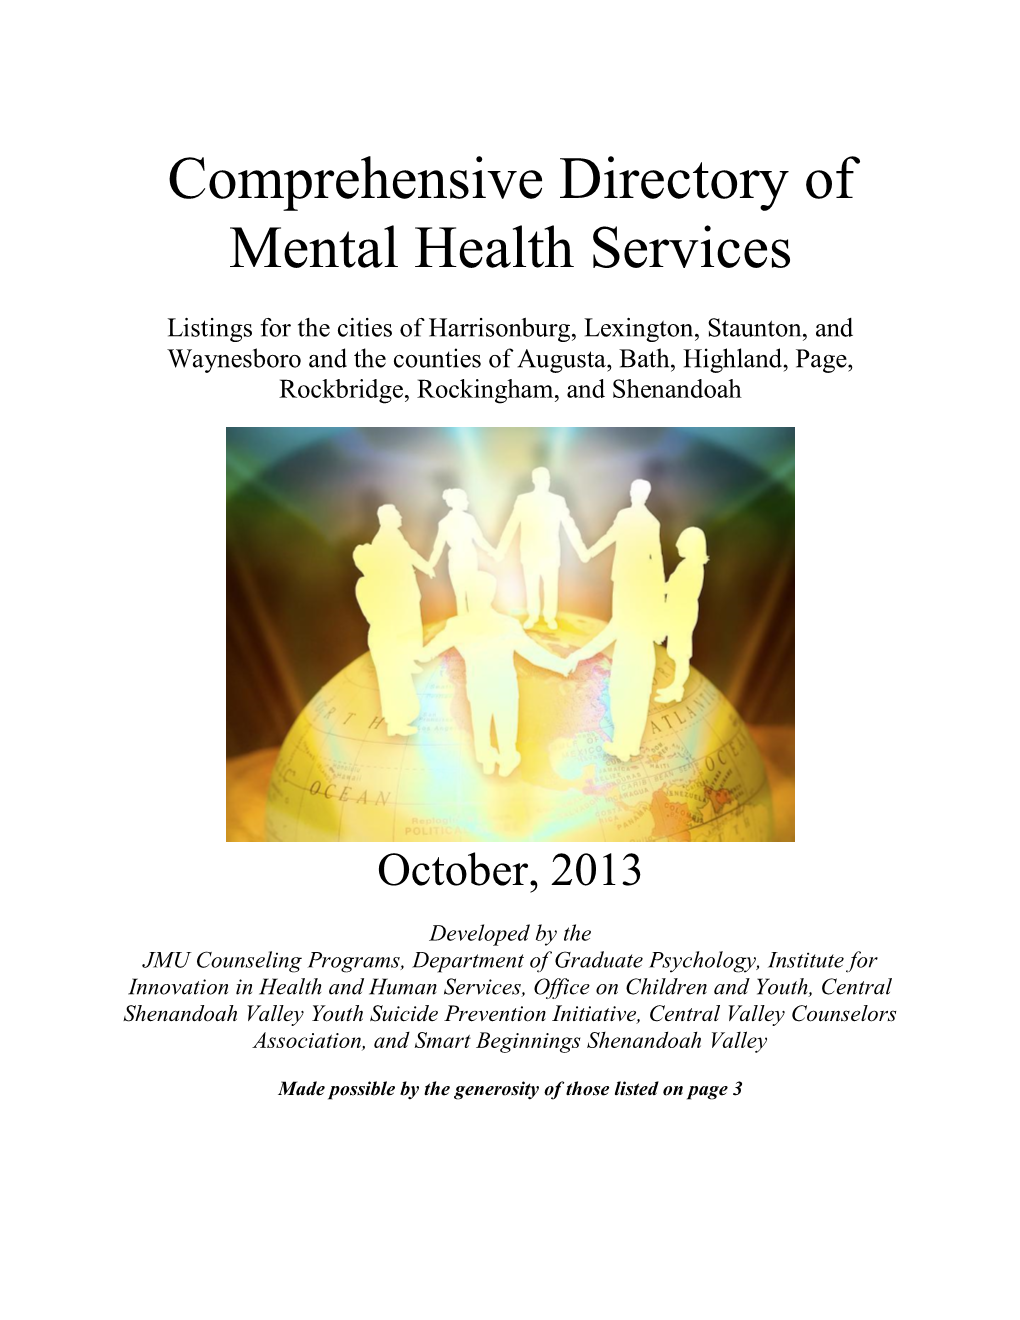 Comprehensive Directory of Mental Health Services